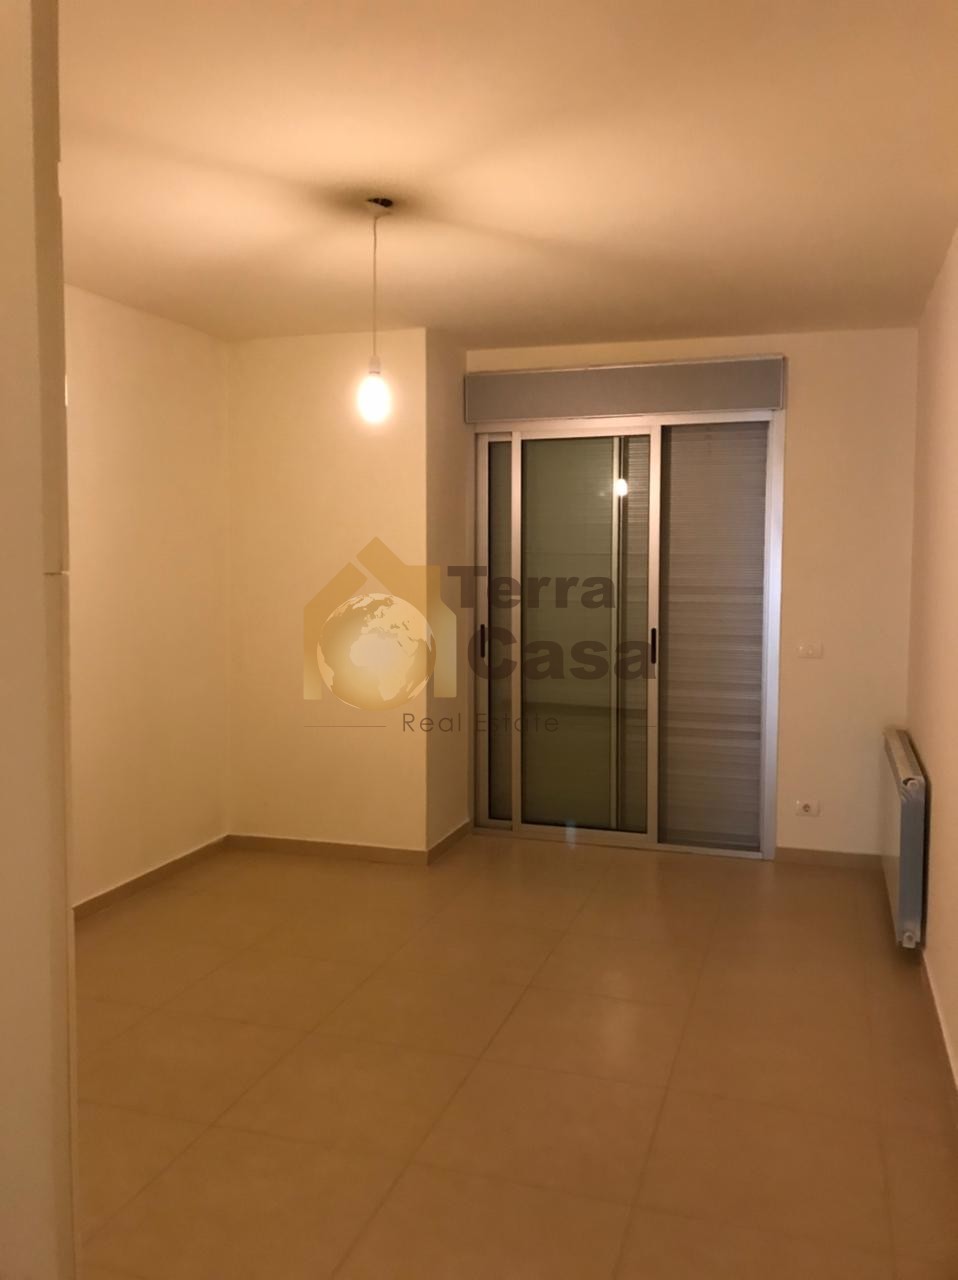 Brand new luxurious apartment cash payment.Ref# 2761